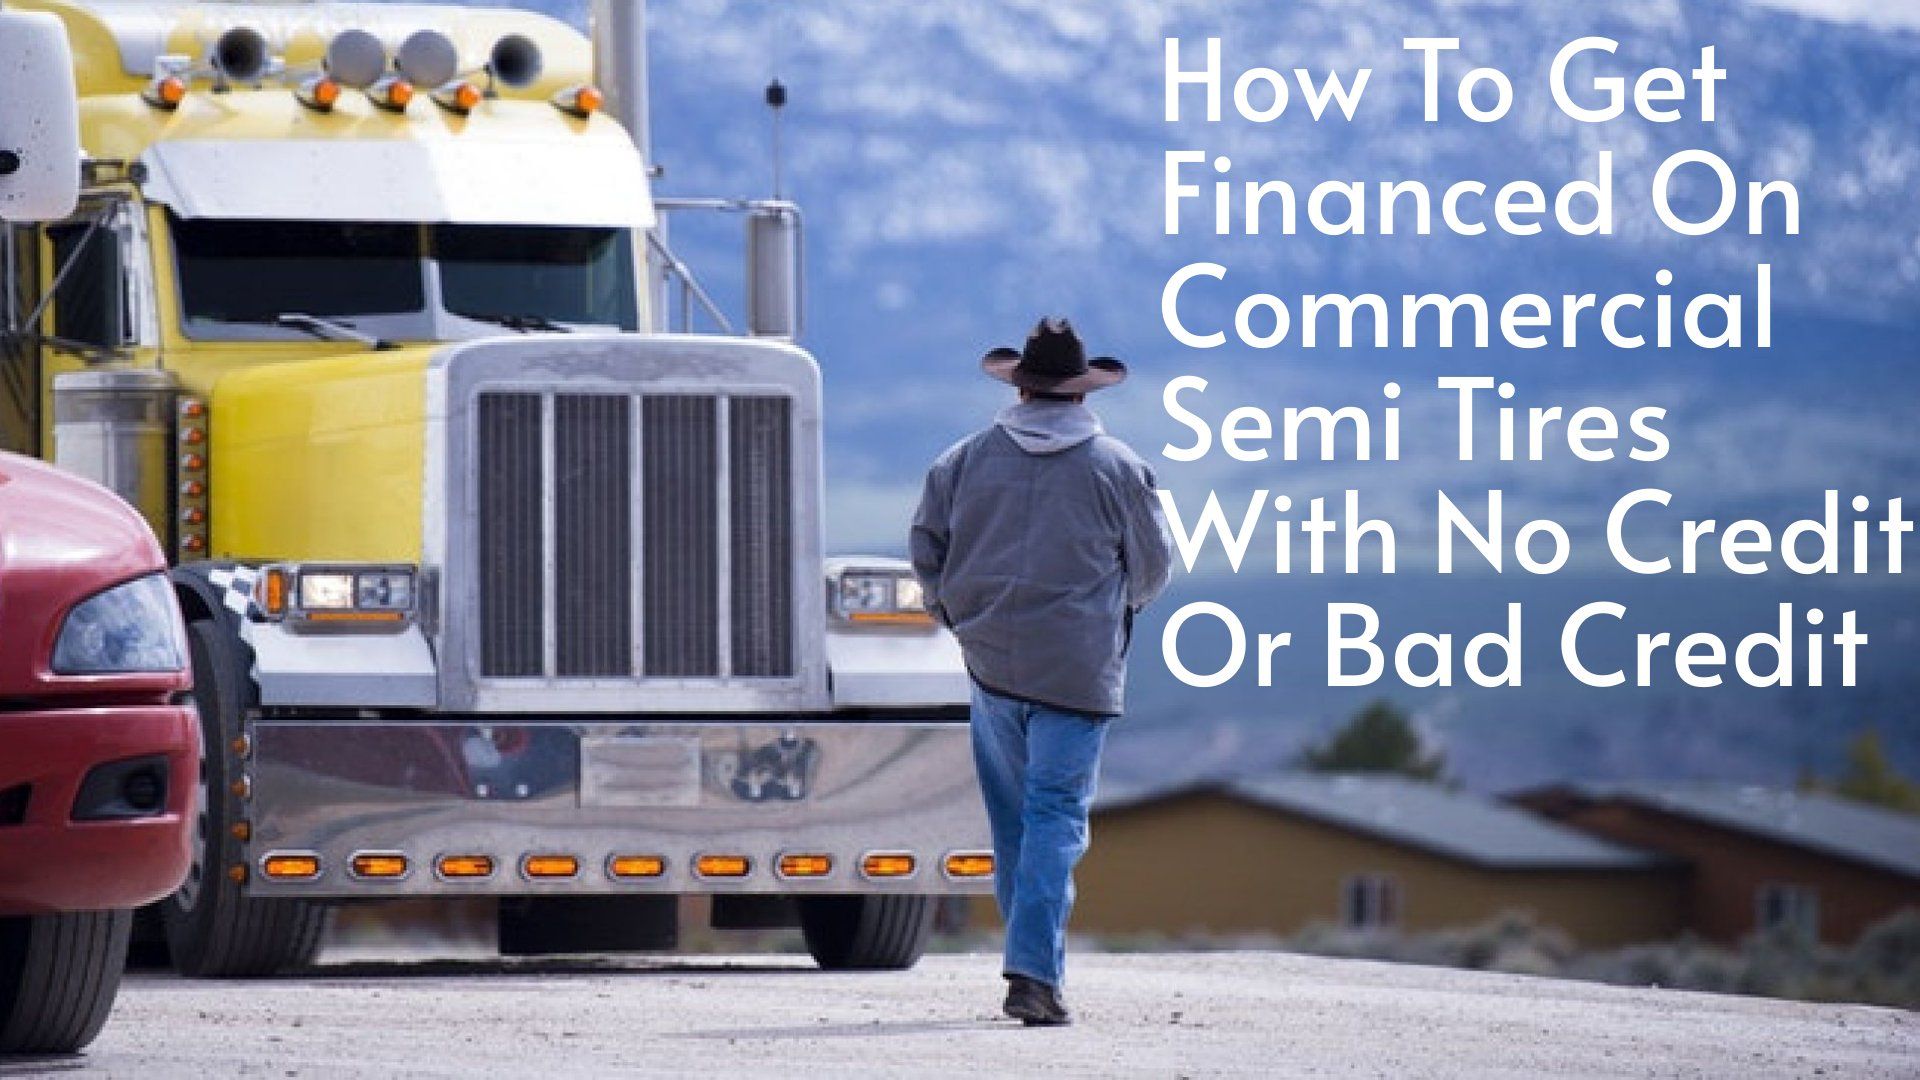 How To Get Financed On Commercial Semi Tires With No Credit Or Bad Credit